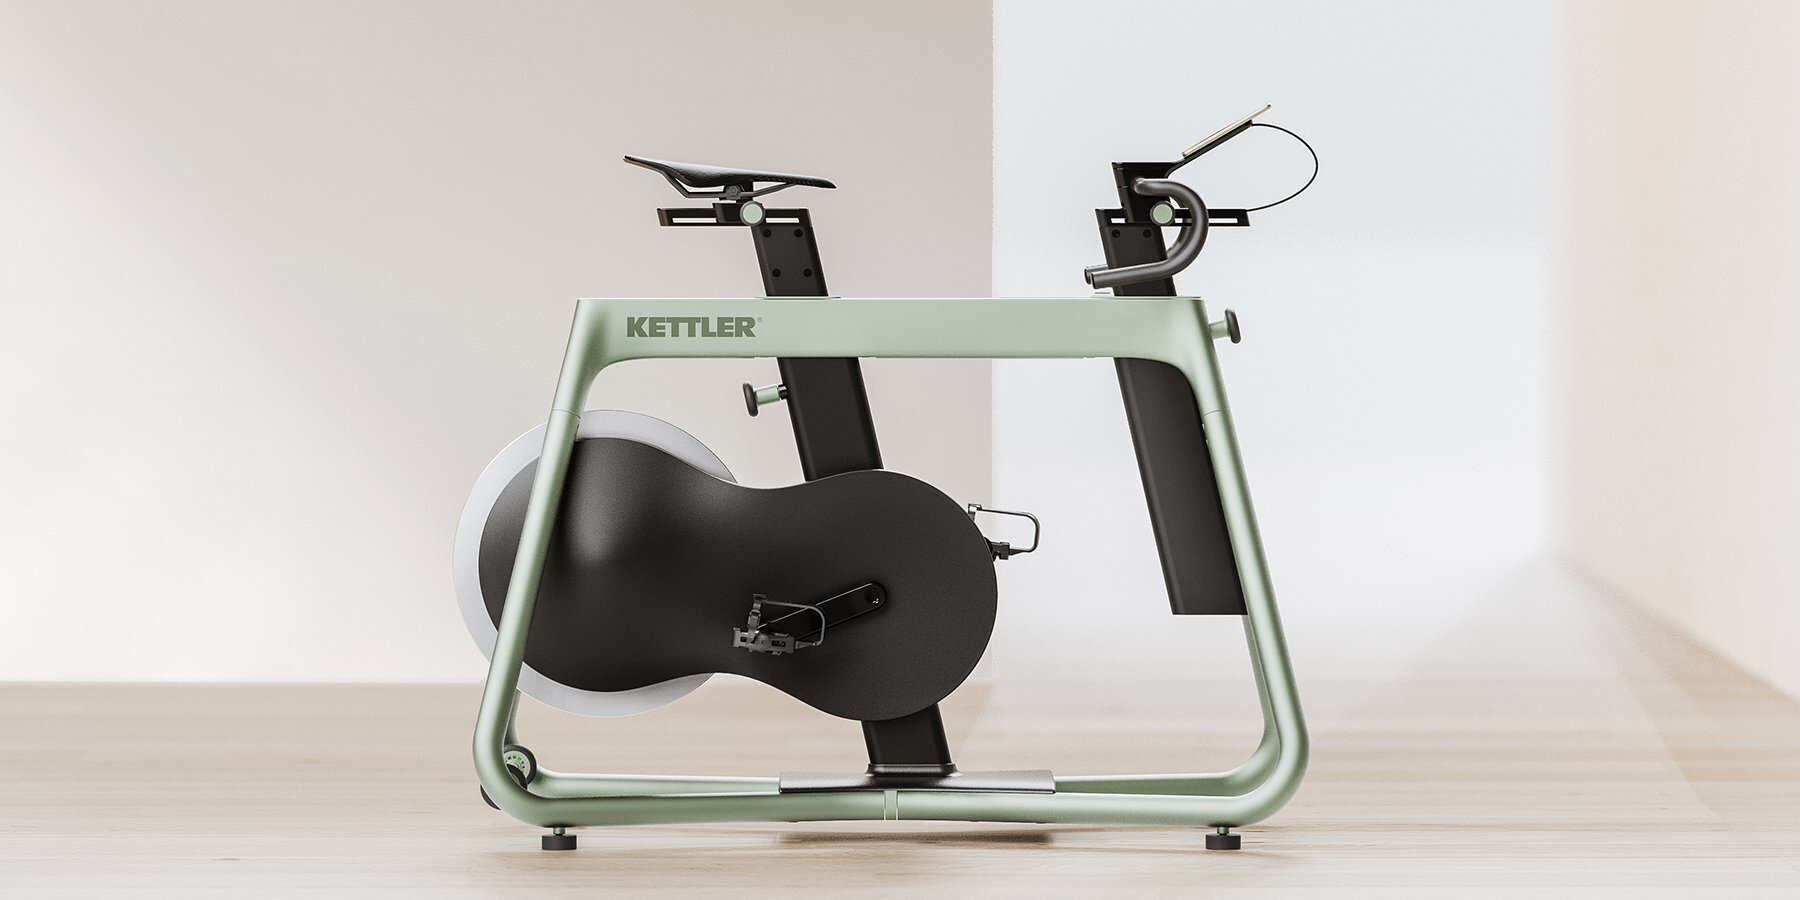 forpeople’s new bike design for kettler combines performance and domesticity